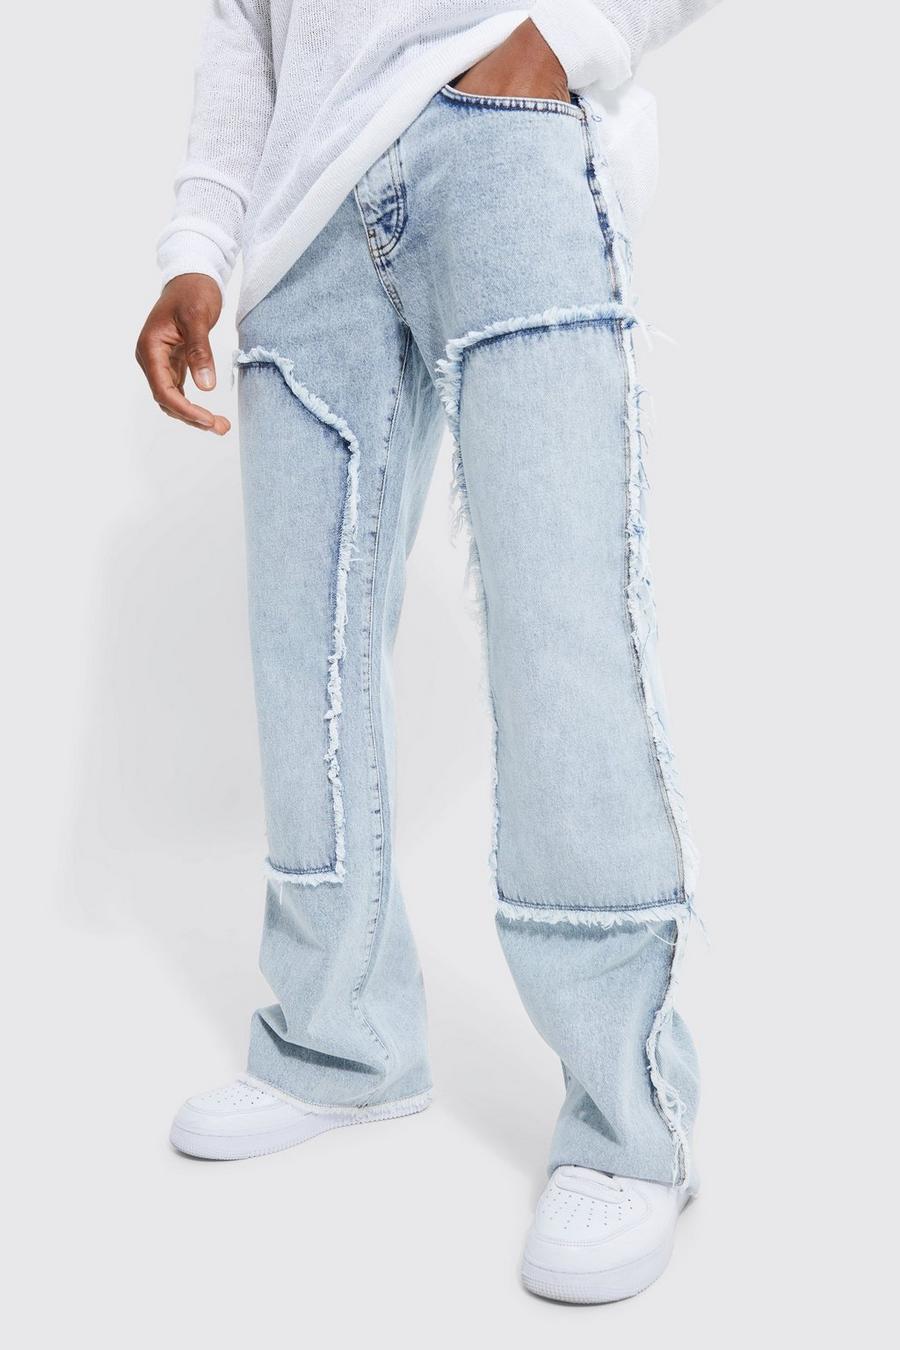 Jean baggy utilitaire, Ice blue